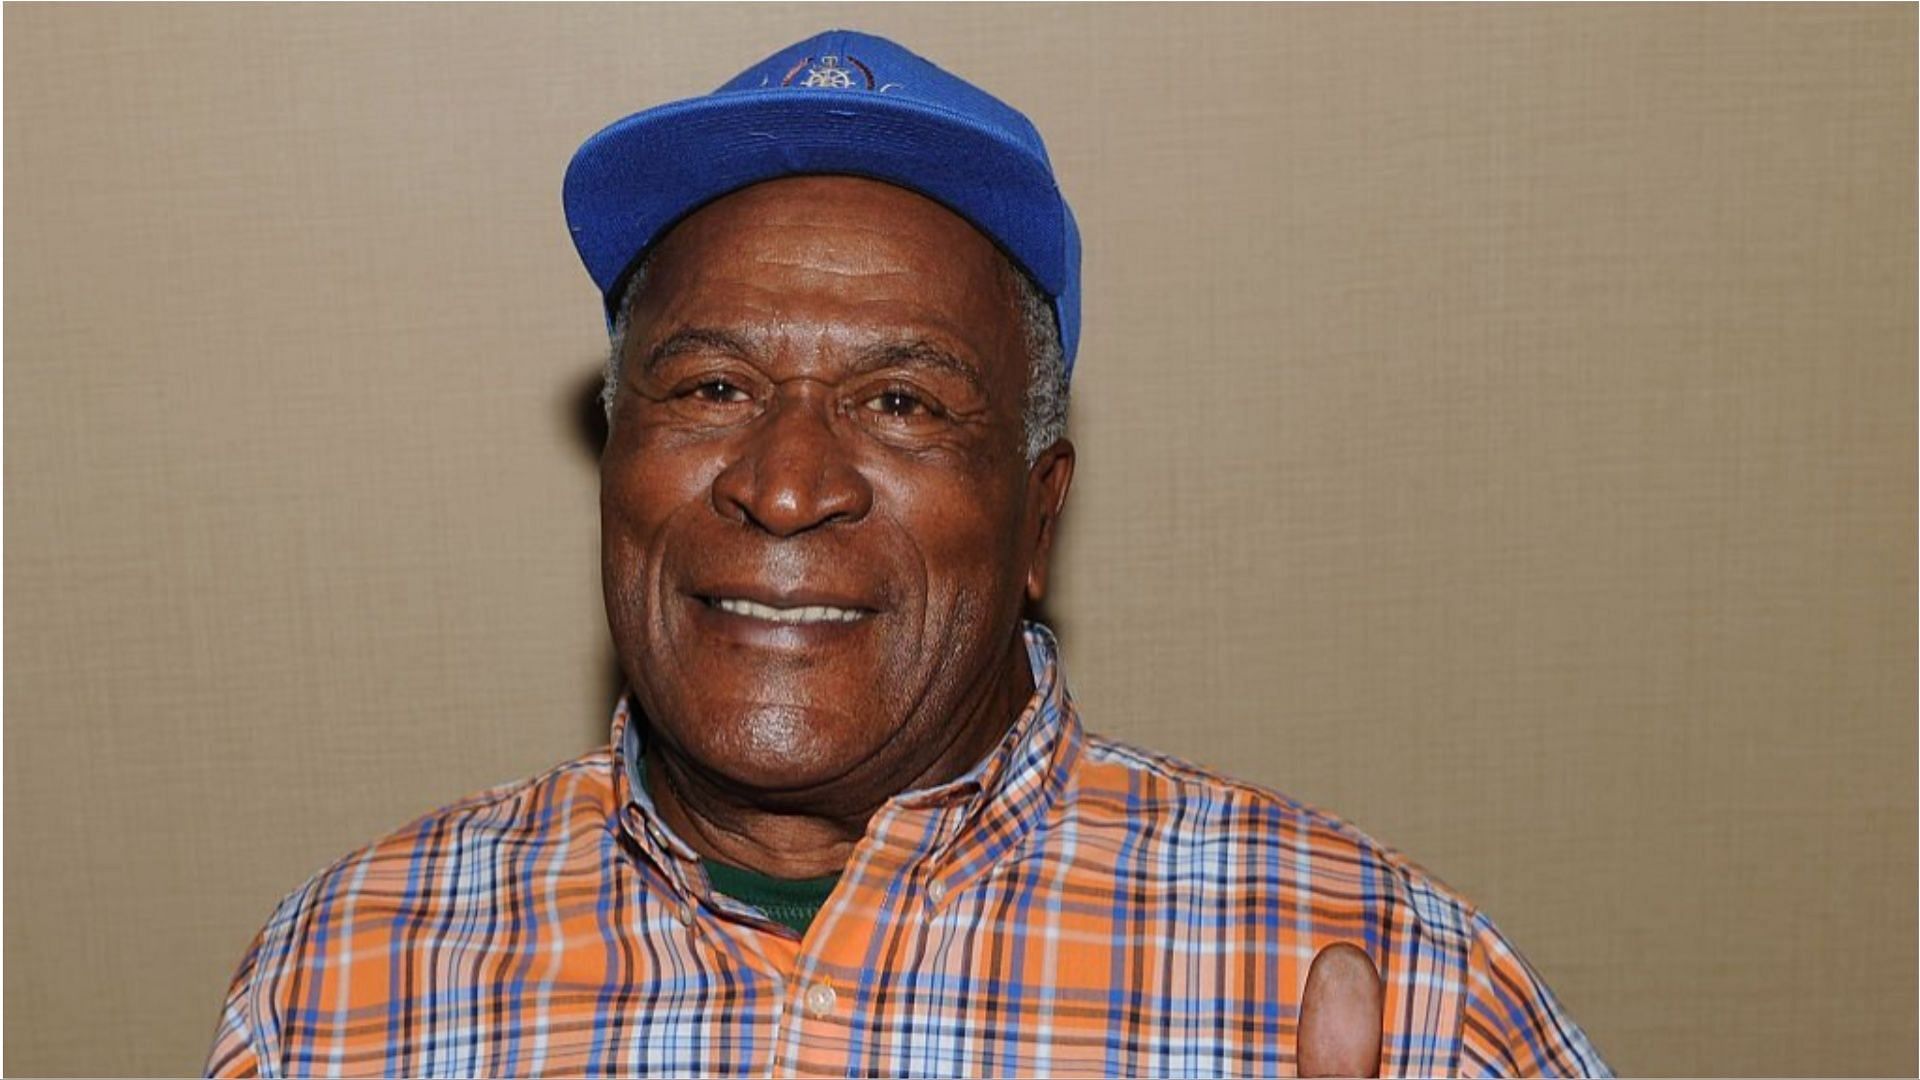 John Amos has been hospitalized after becoming victim to elder abuse (Image via Bobby Bank/Getty Images)